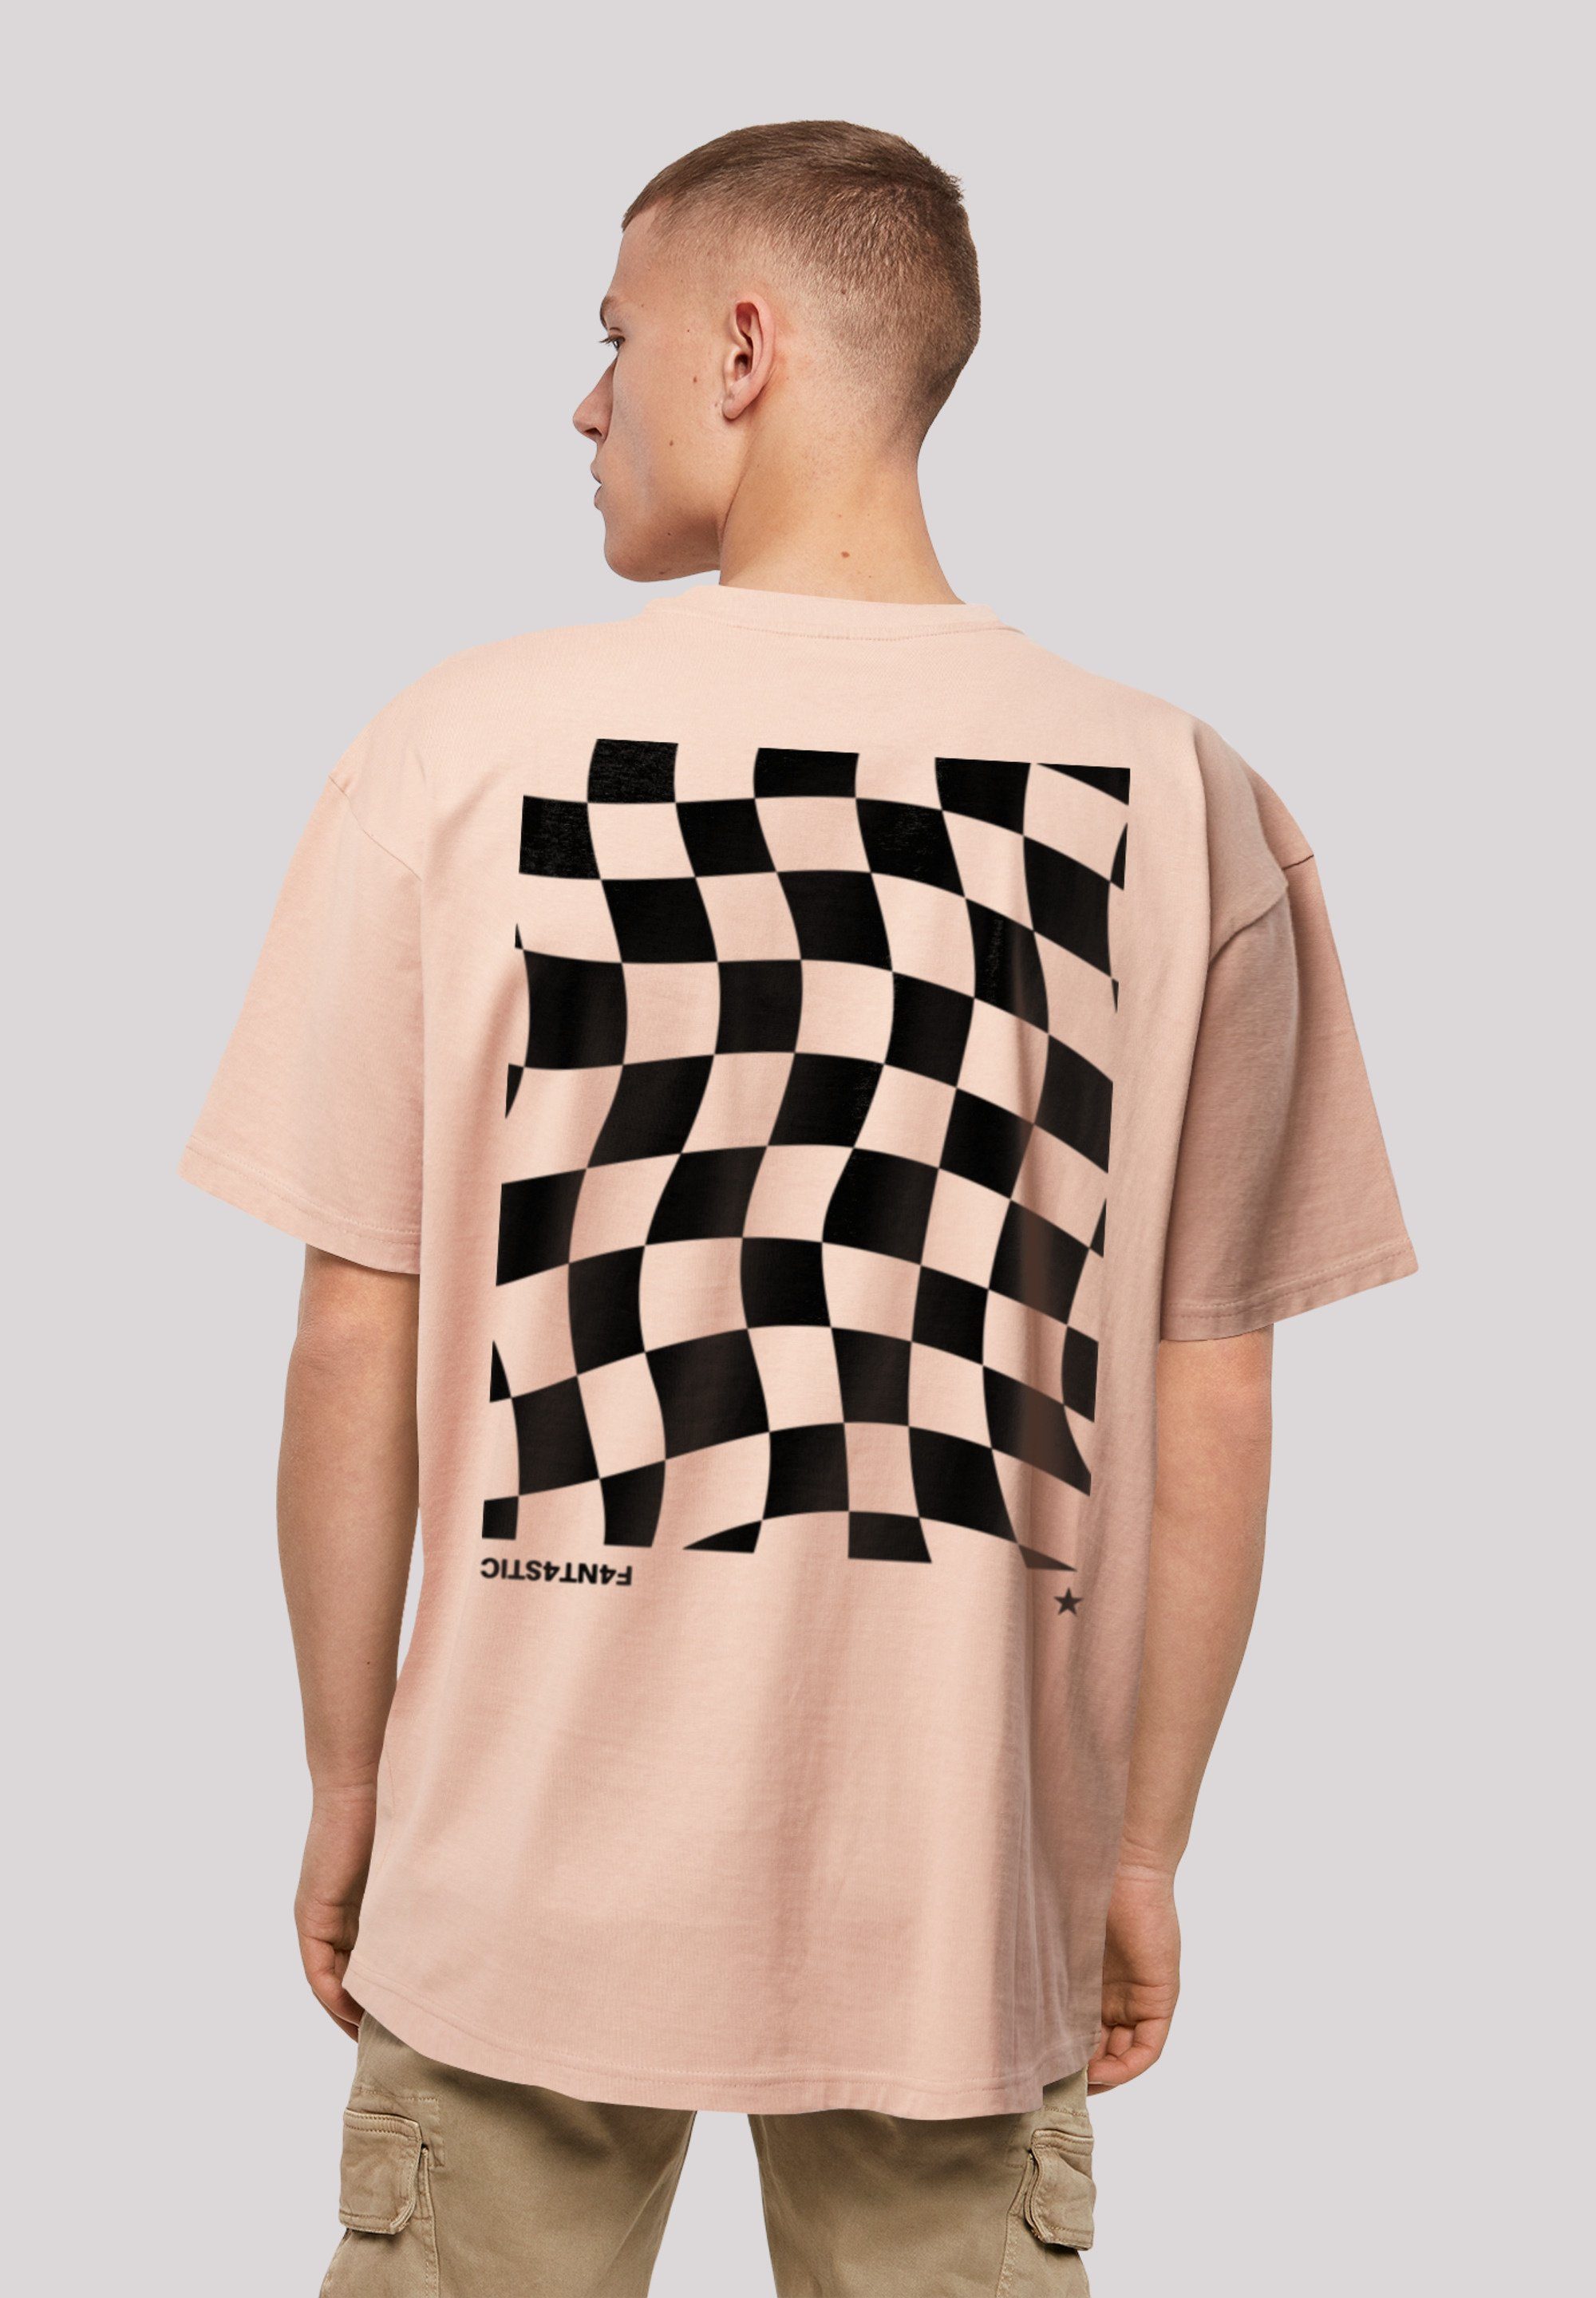 F4NT4STIC T-Shirt Wavy Schach amber Print Muster